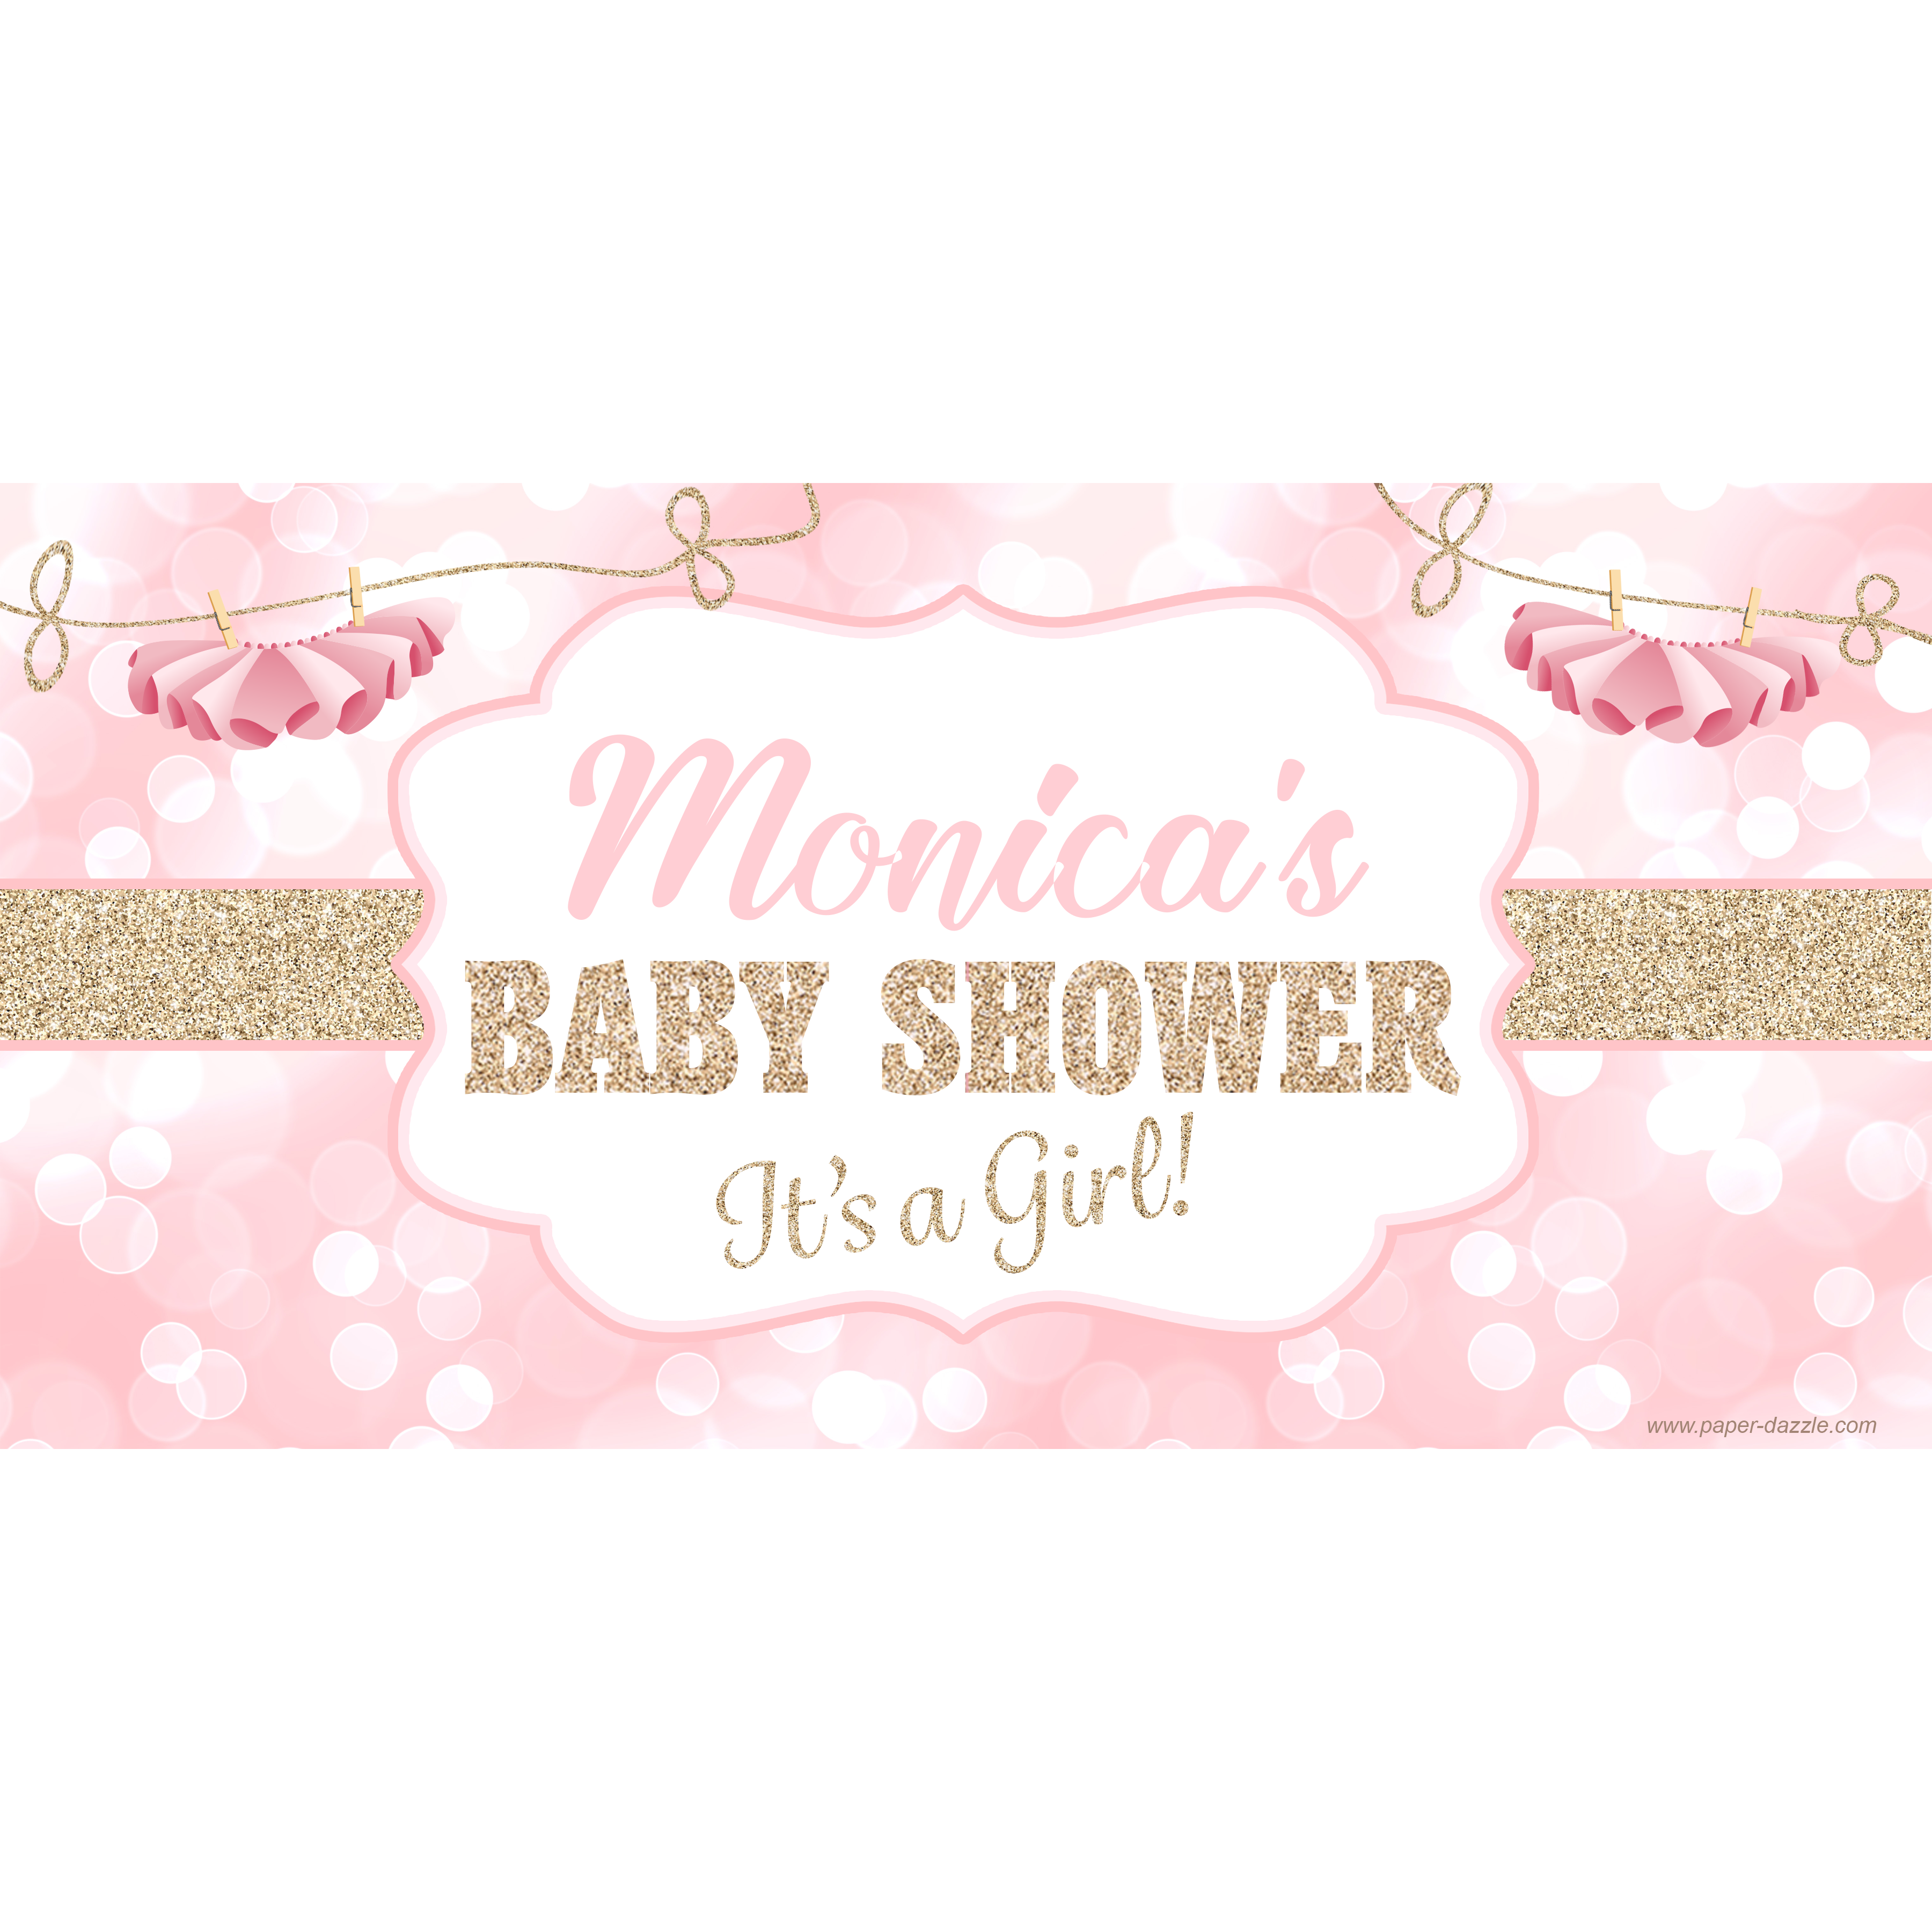 Full Size of Baby Shower:89+ Indulging Baby Shower Banner Picture Inspirations Baby Shower Banner Or Baby Shower Cookies With Baby Shower Pictures Plus Baby Shower Presents Together With Bebe Baby Shower As Well As Baby Shower Drinks And Great Baby Shower Gifts